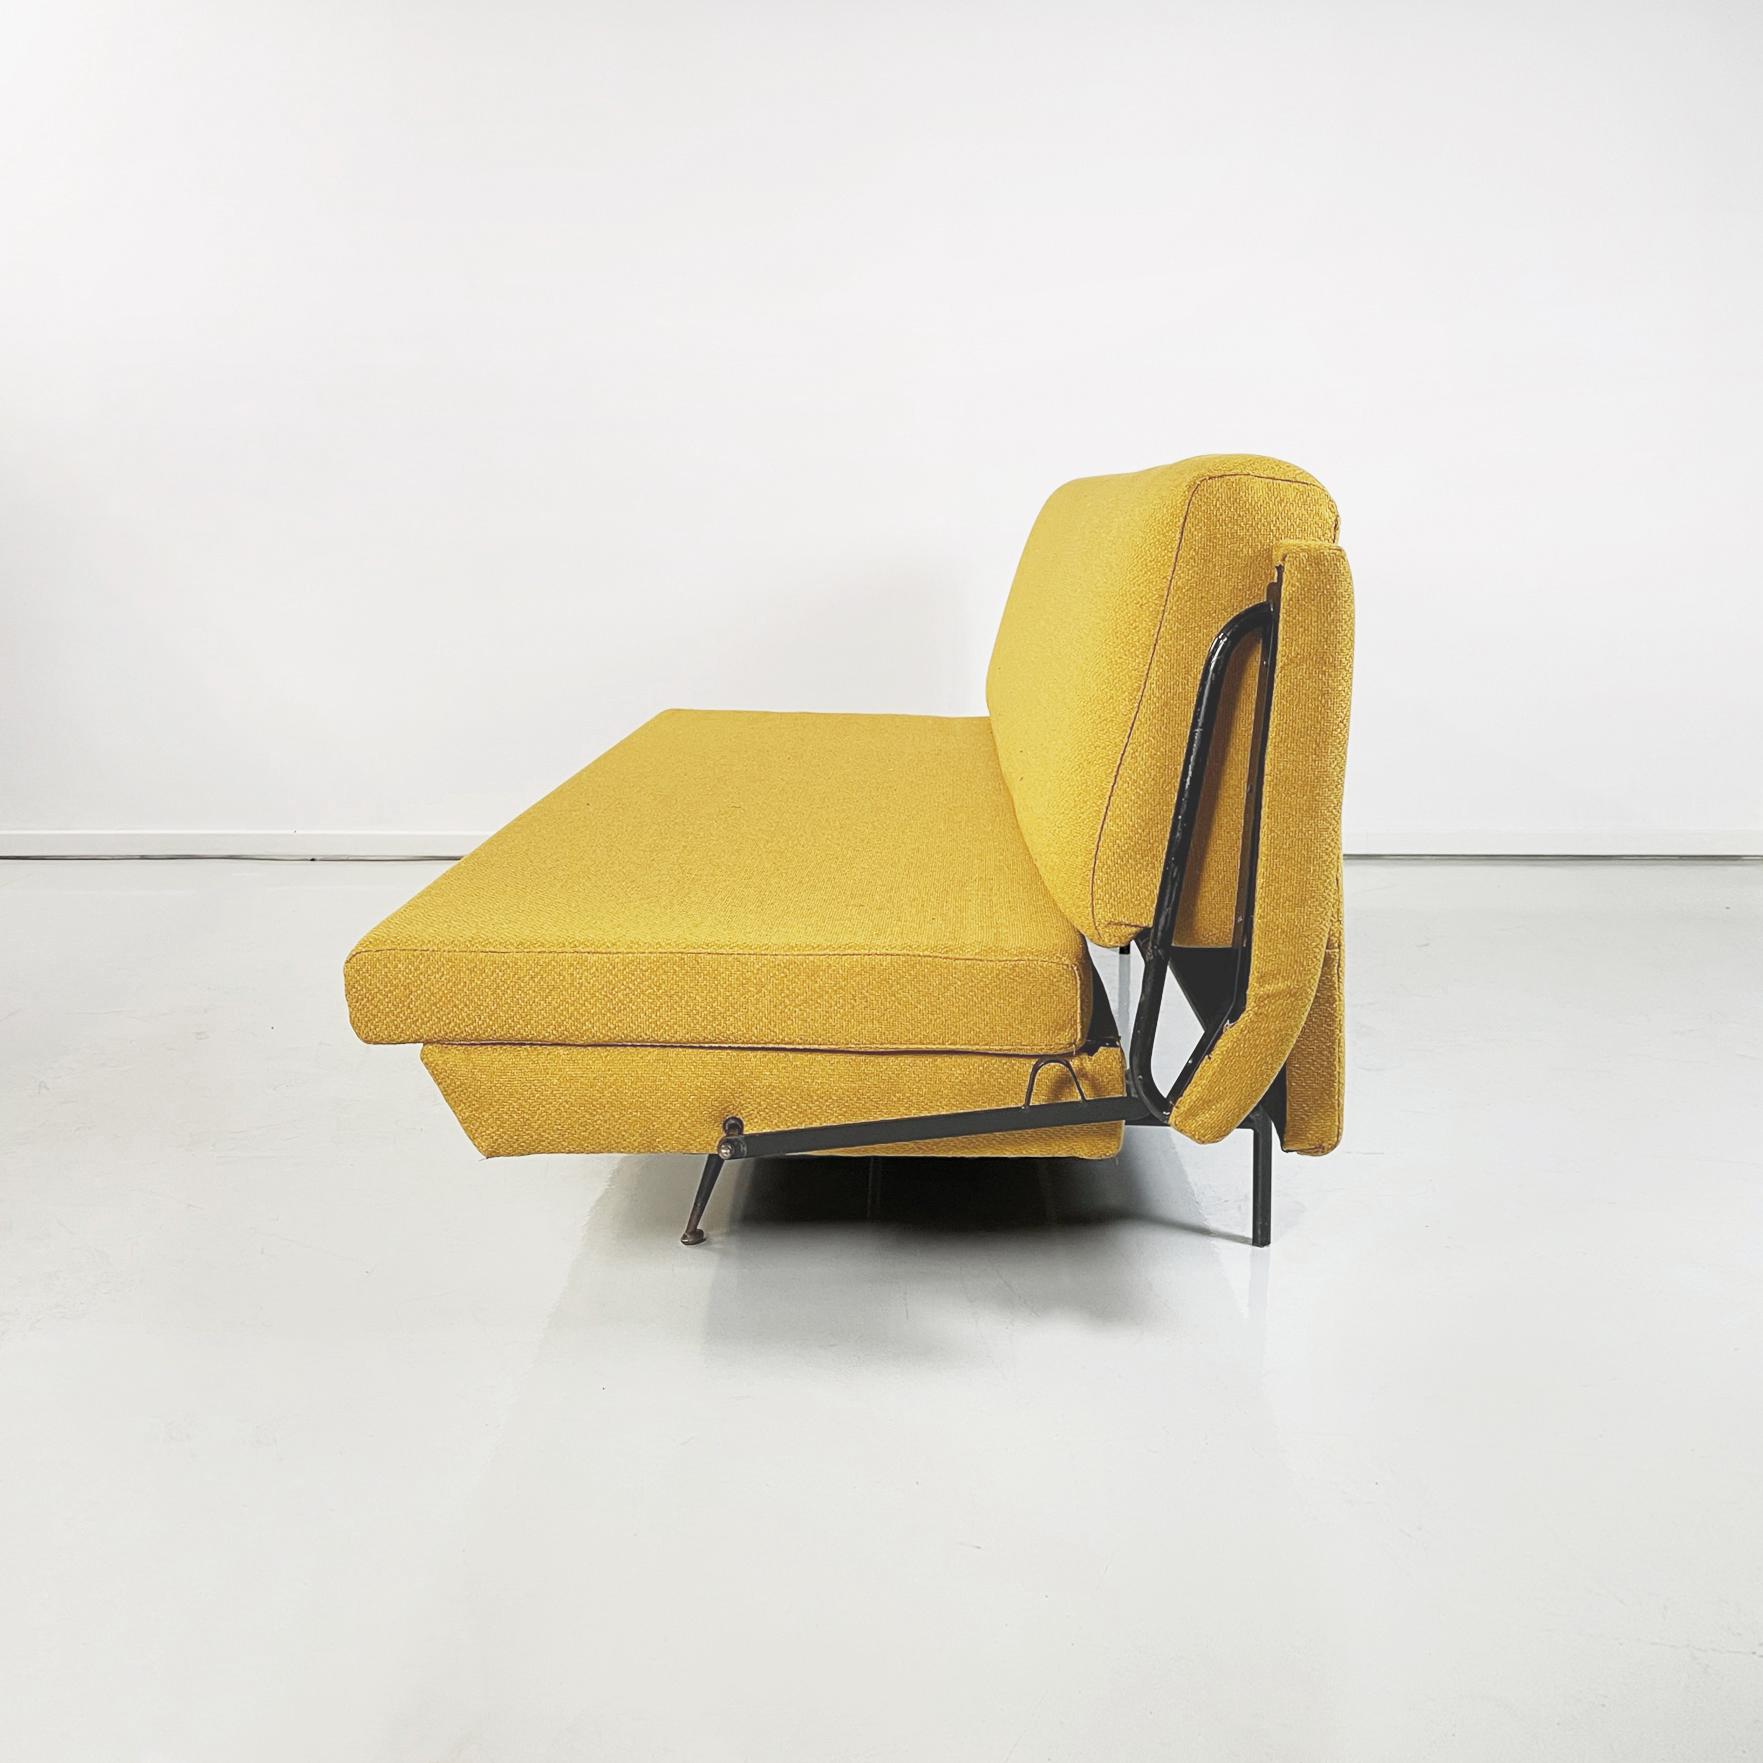 Italian Mid-Century Modern Sofa and Bed in Yellow Fabric and Black Metal, 1960s 1